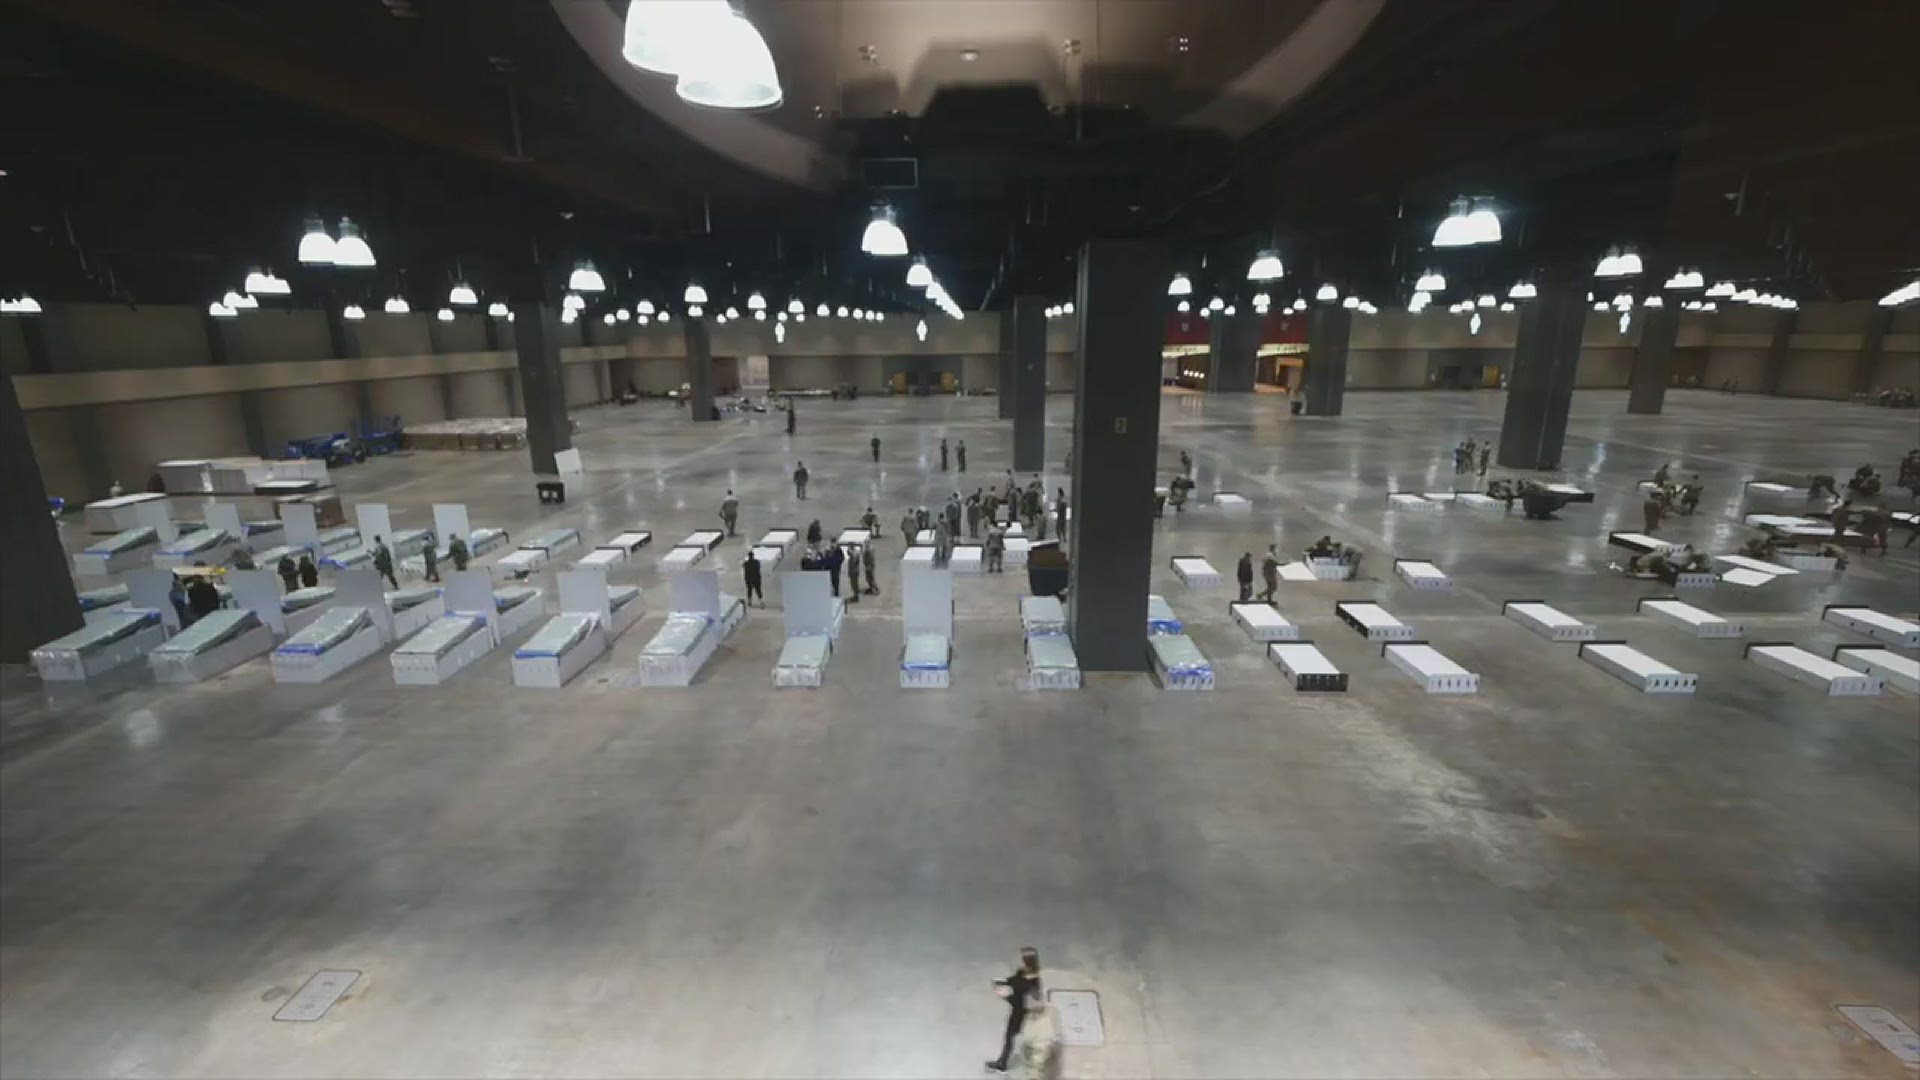 Time lapse video of the National Guard's set-up in action captured by Hartford Healthcare, who will run the annex space.